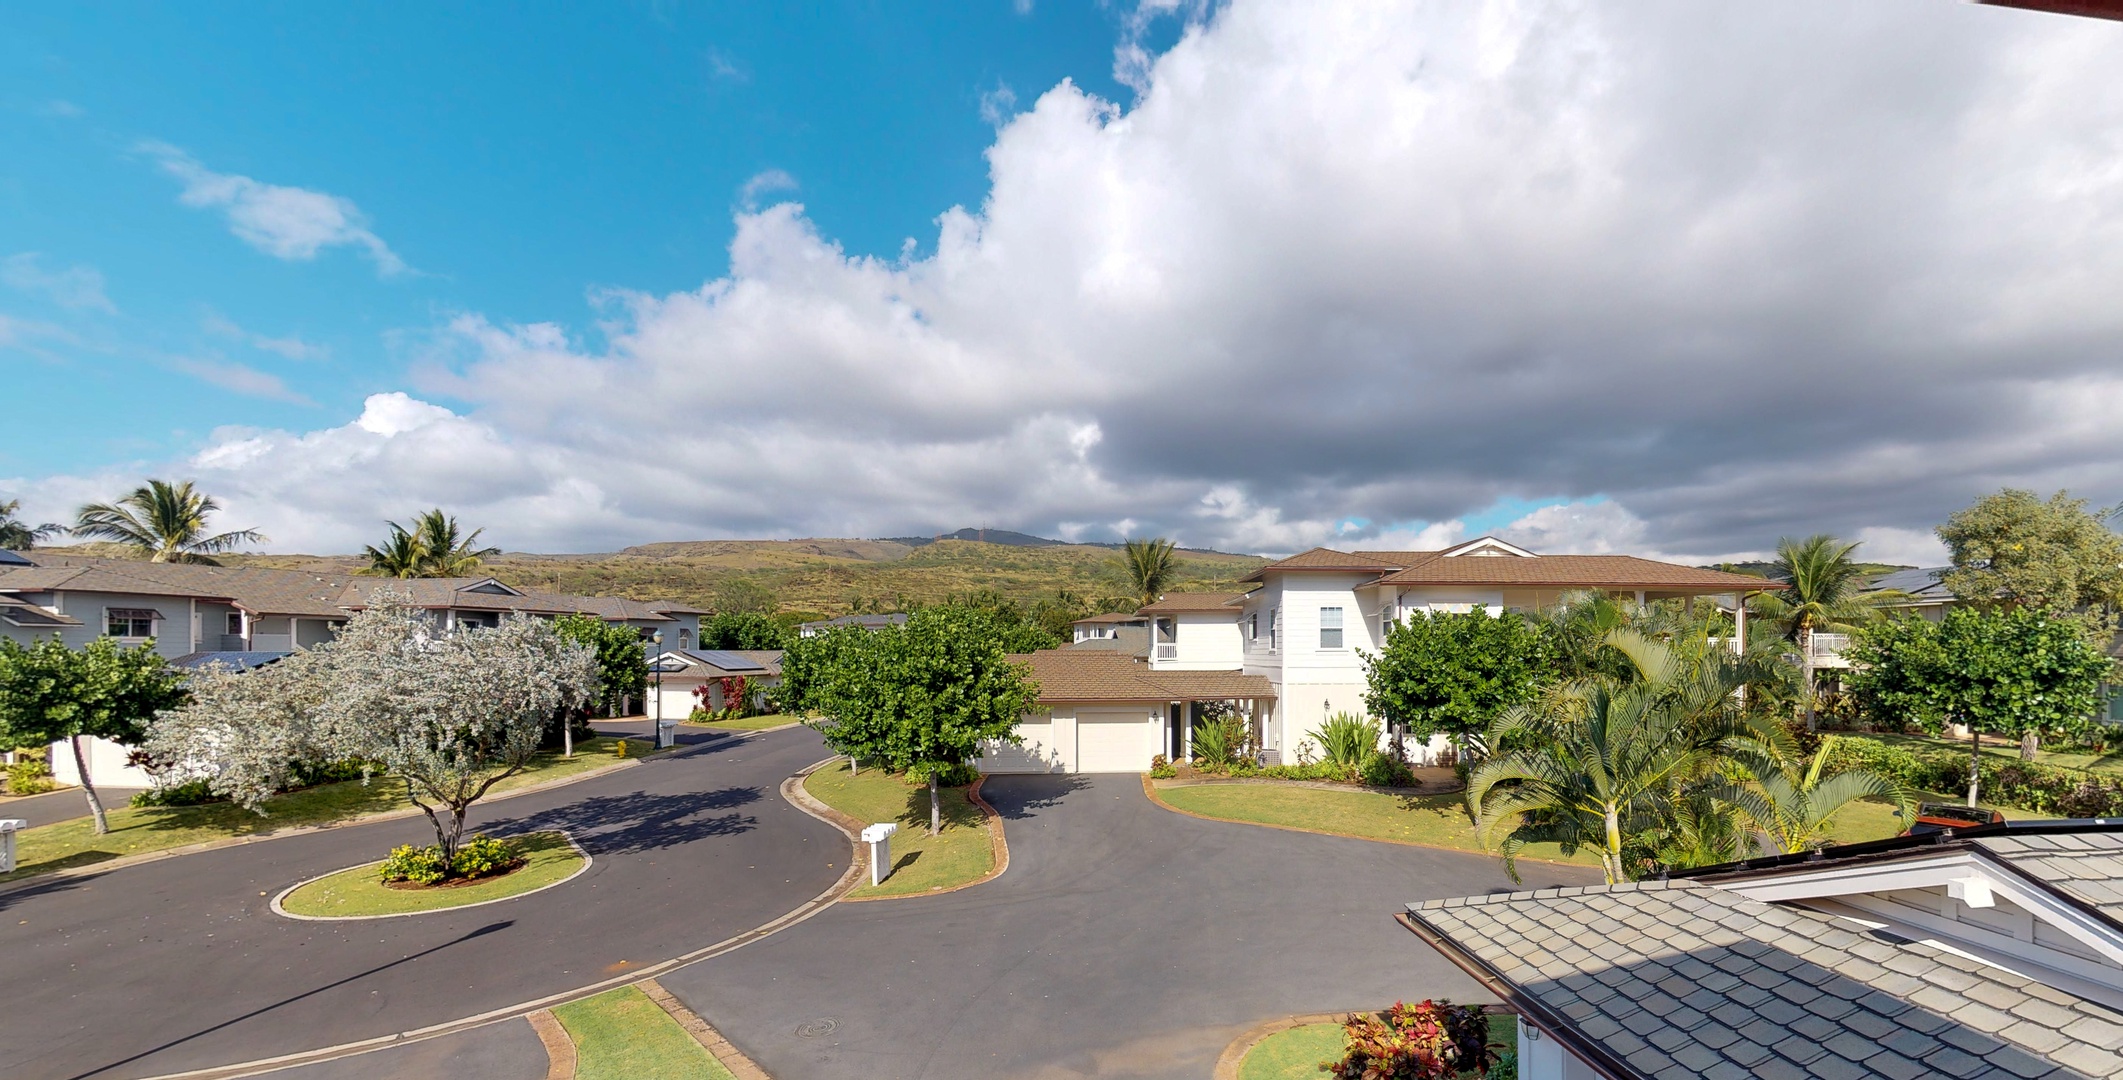 Kapolei Vacation Rentals, Coconut Plantation 1194-3 - An overview photo of the neighborhood.